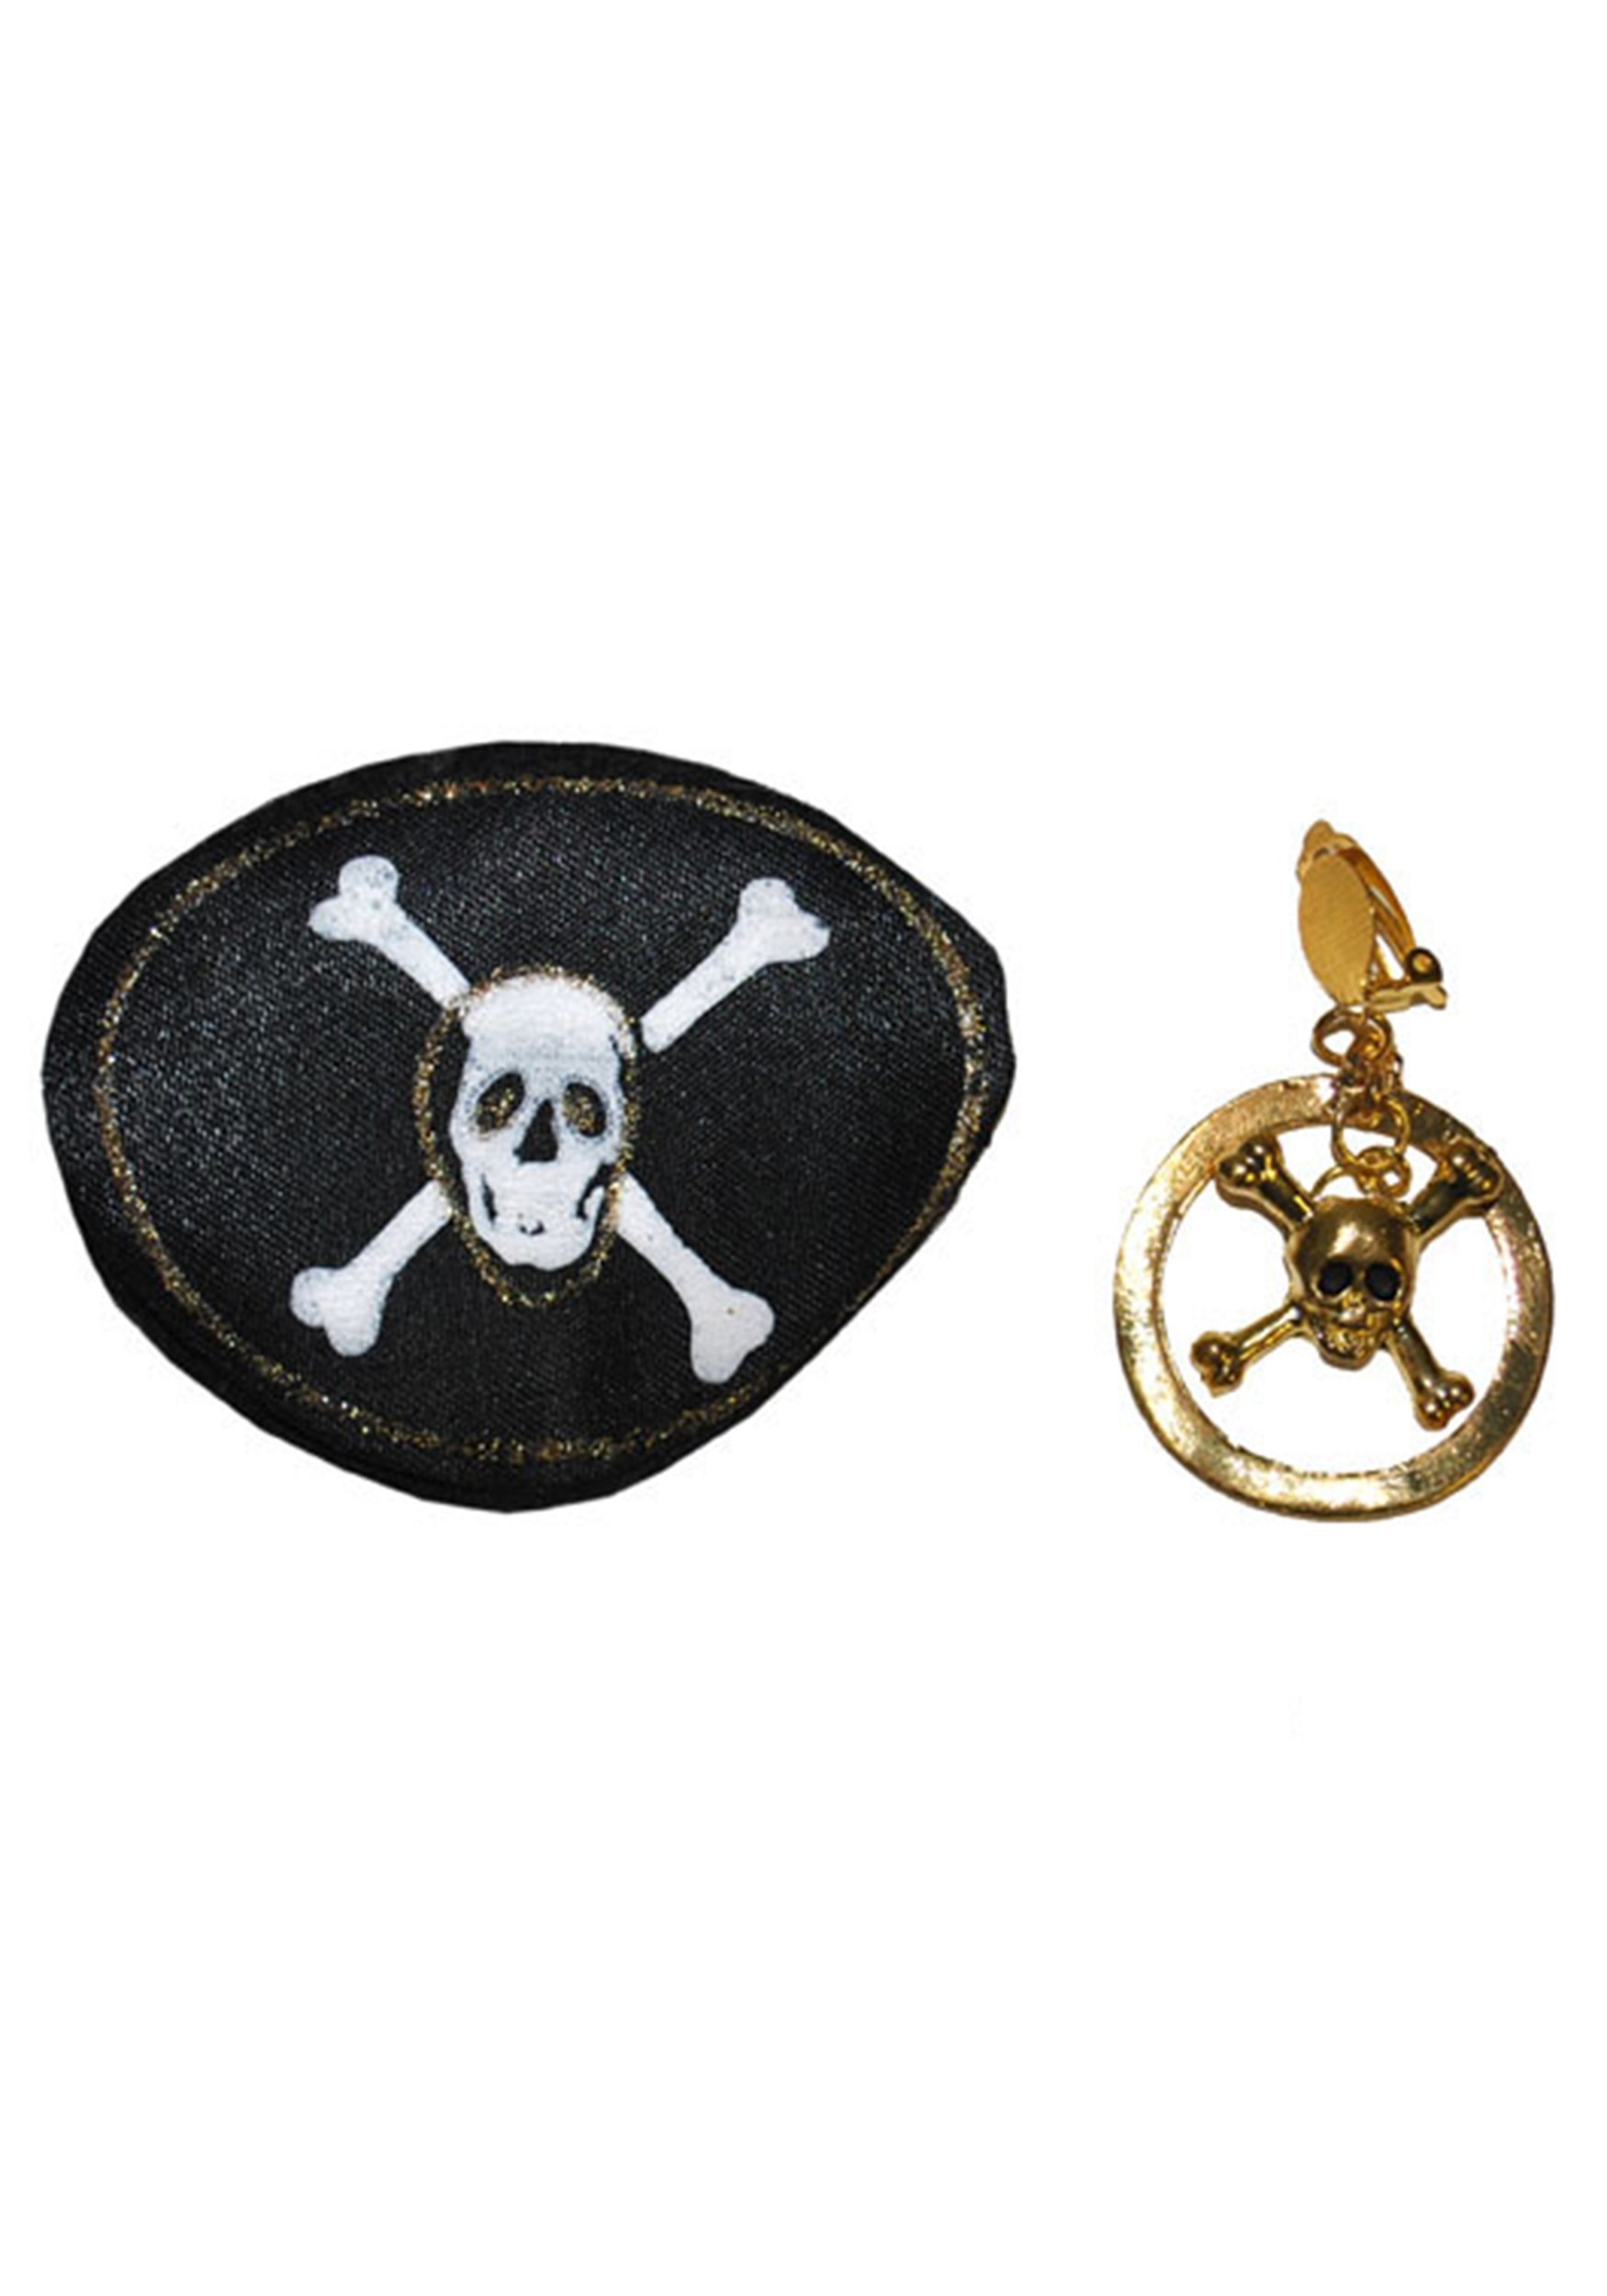 Eyepatch and Earring Pirate Set